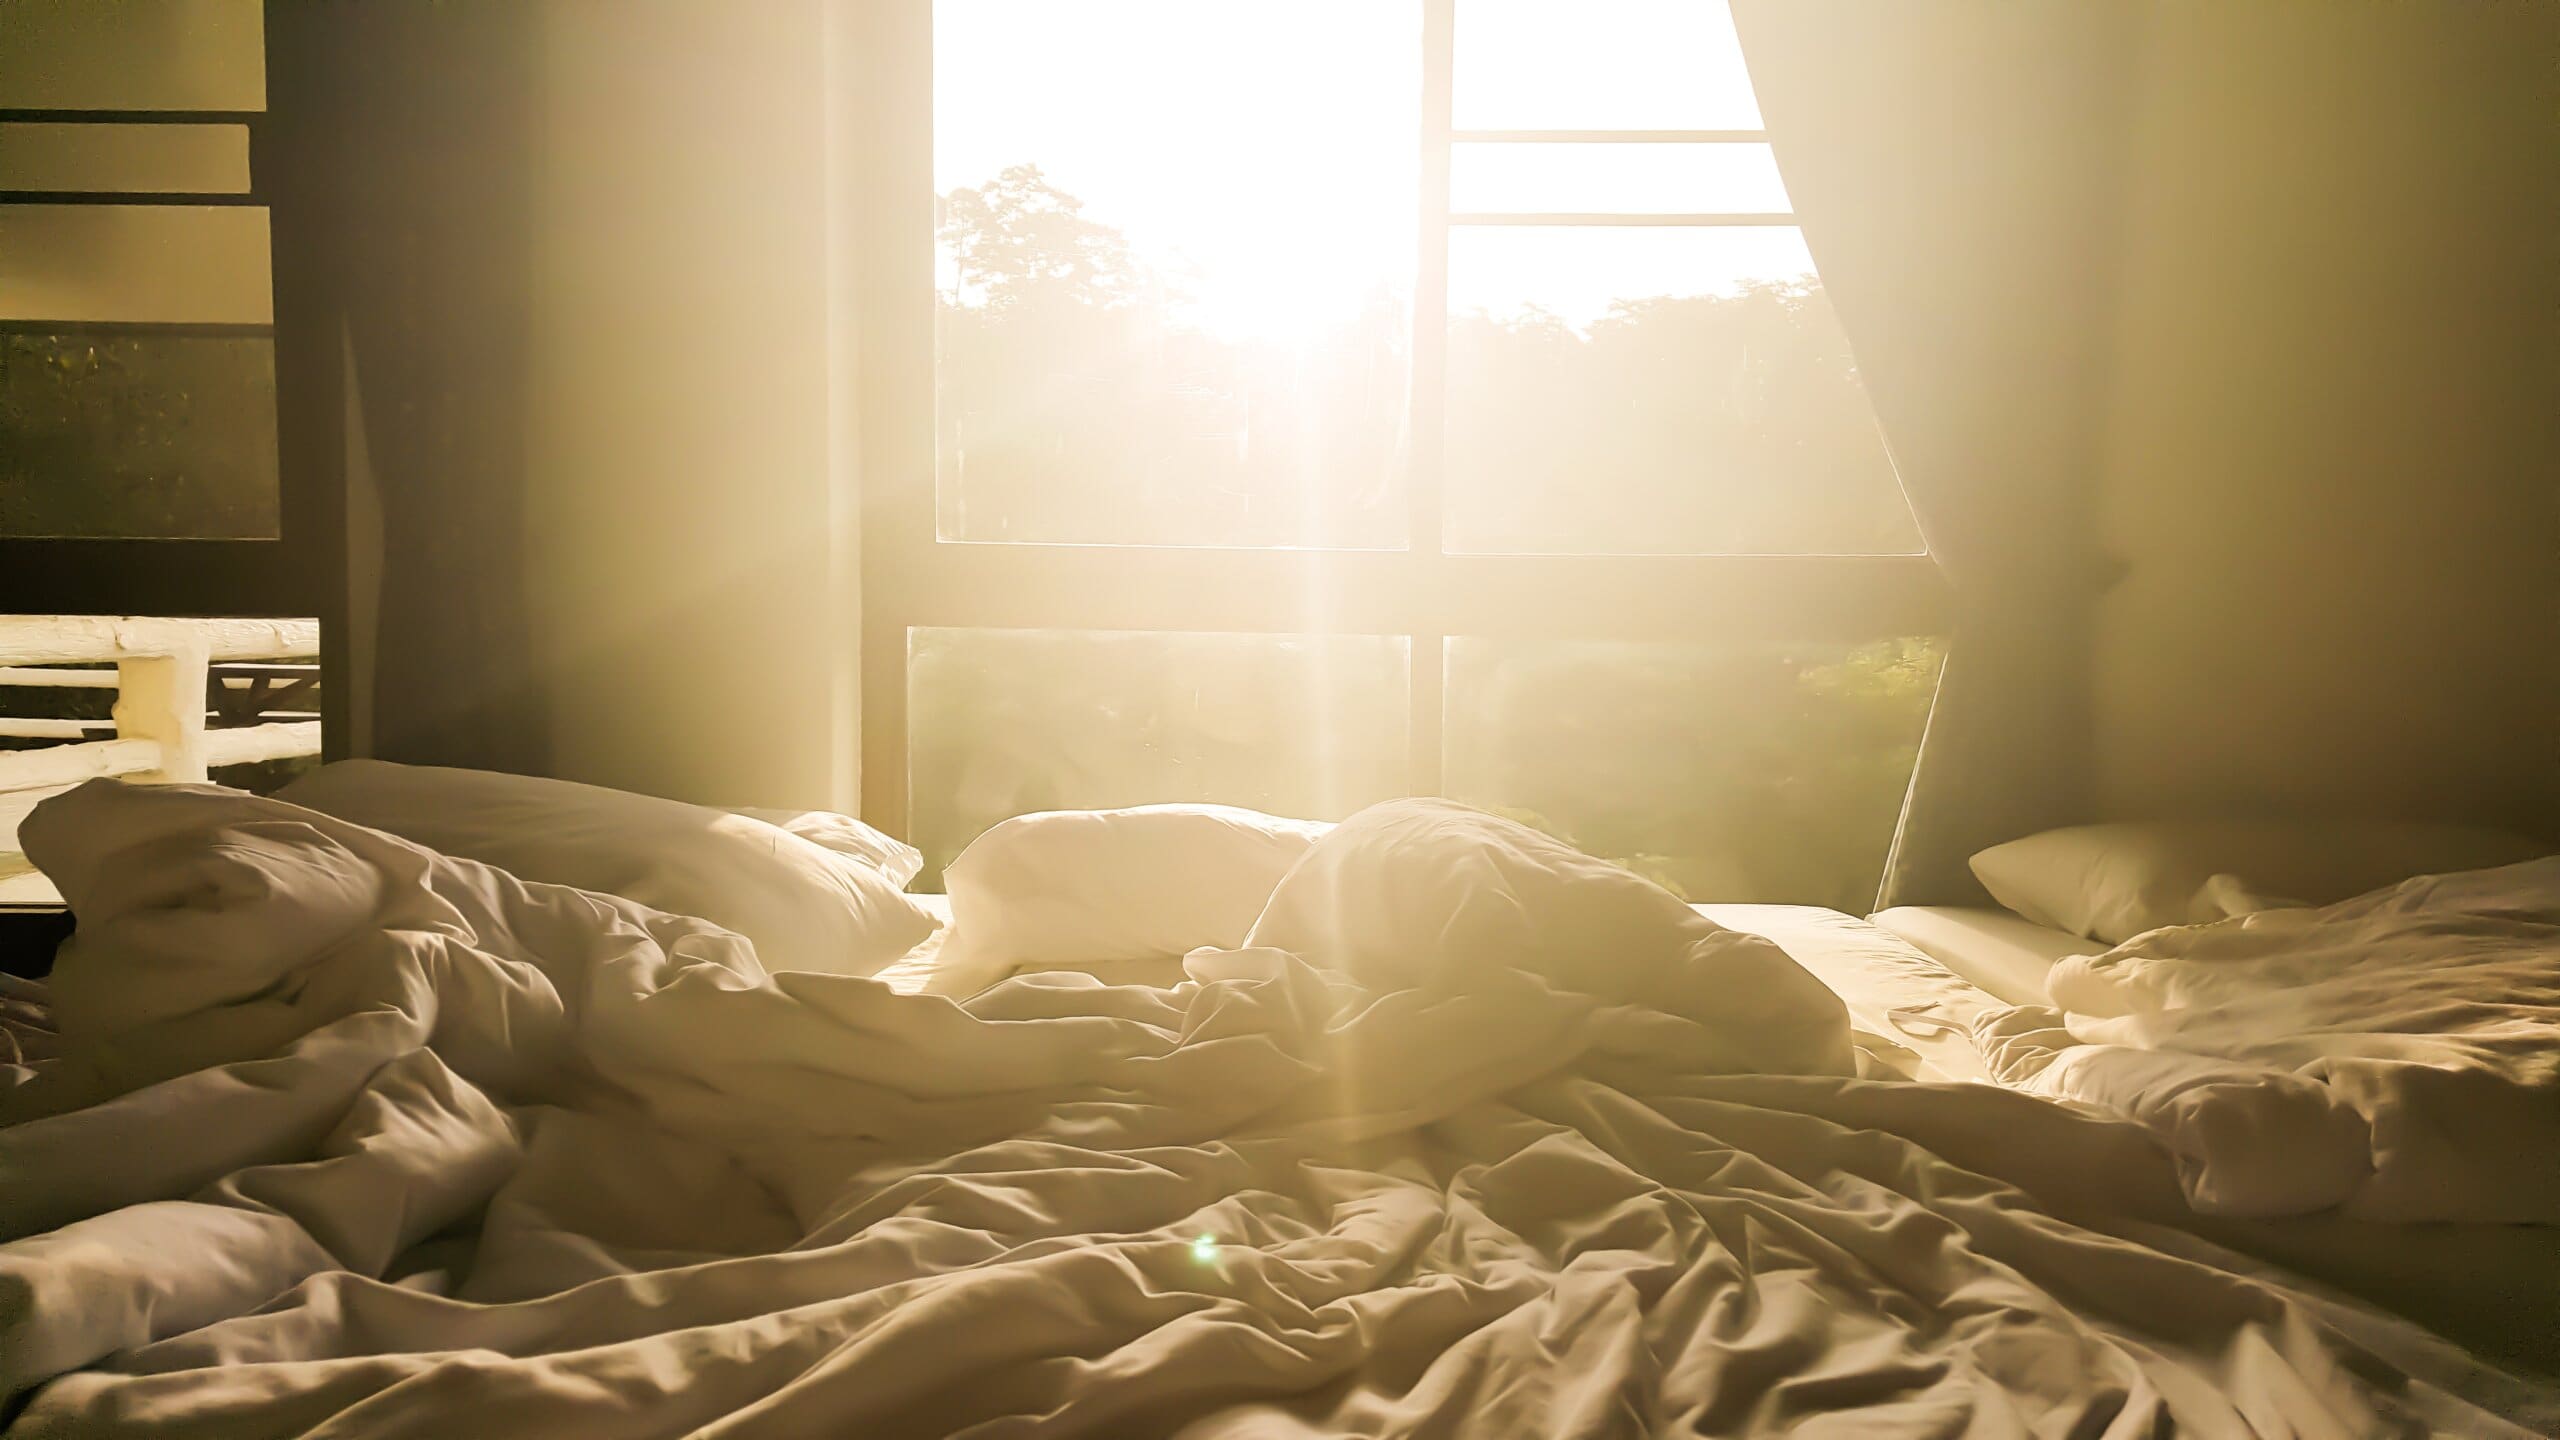 Sunlight coming through the window, shining onto an unmade bed.